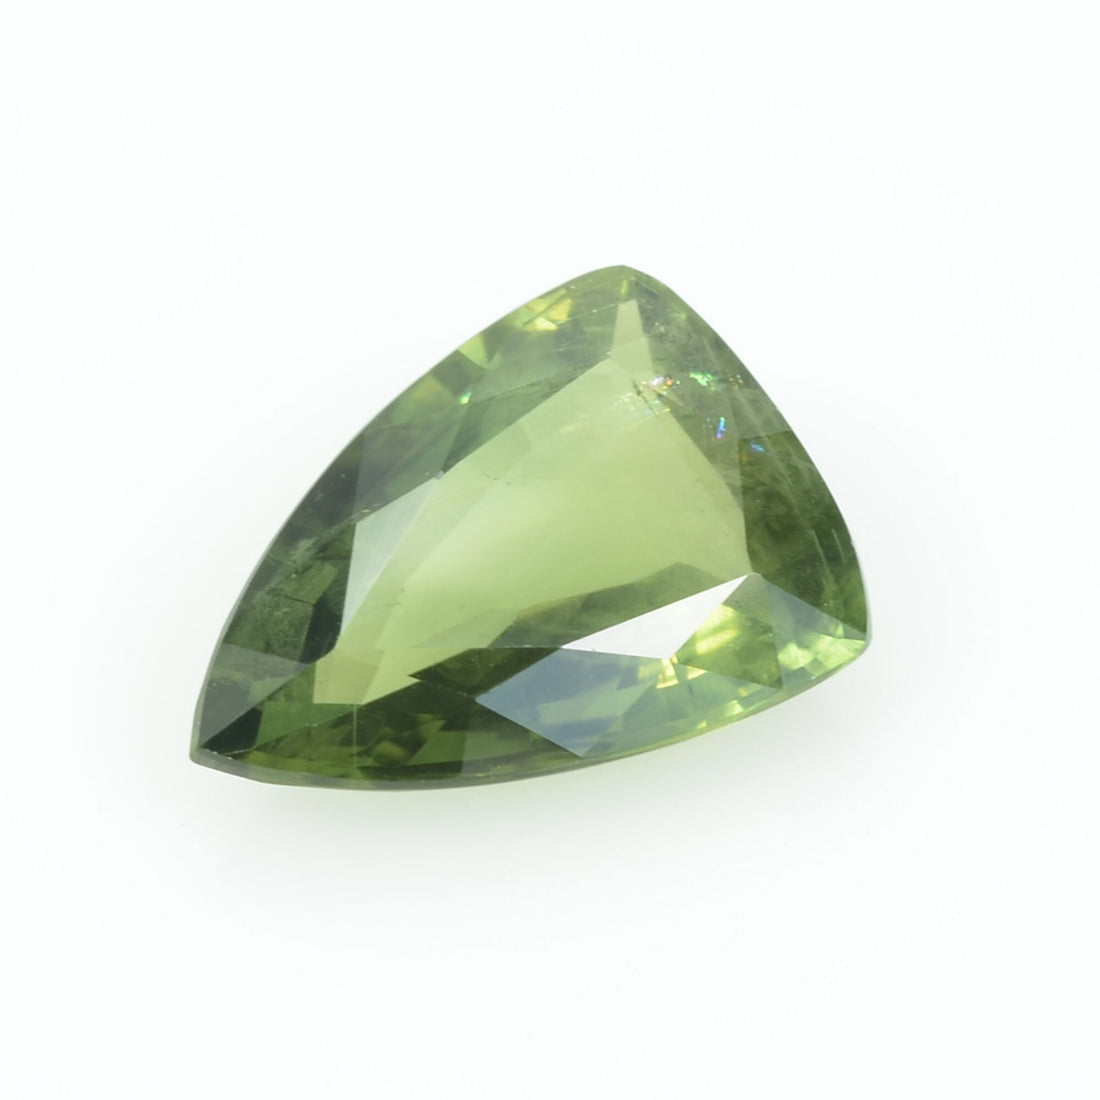 3.26 Cts Natural Green Sapphire Loose Gemstone Fancy Cut